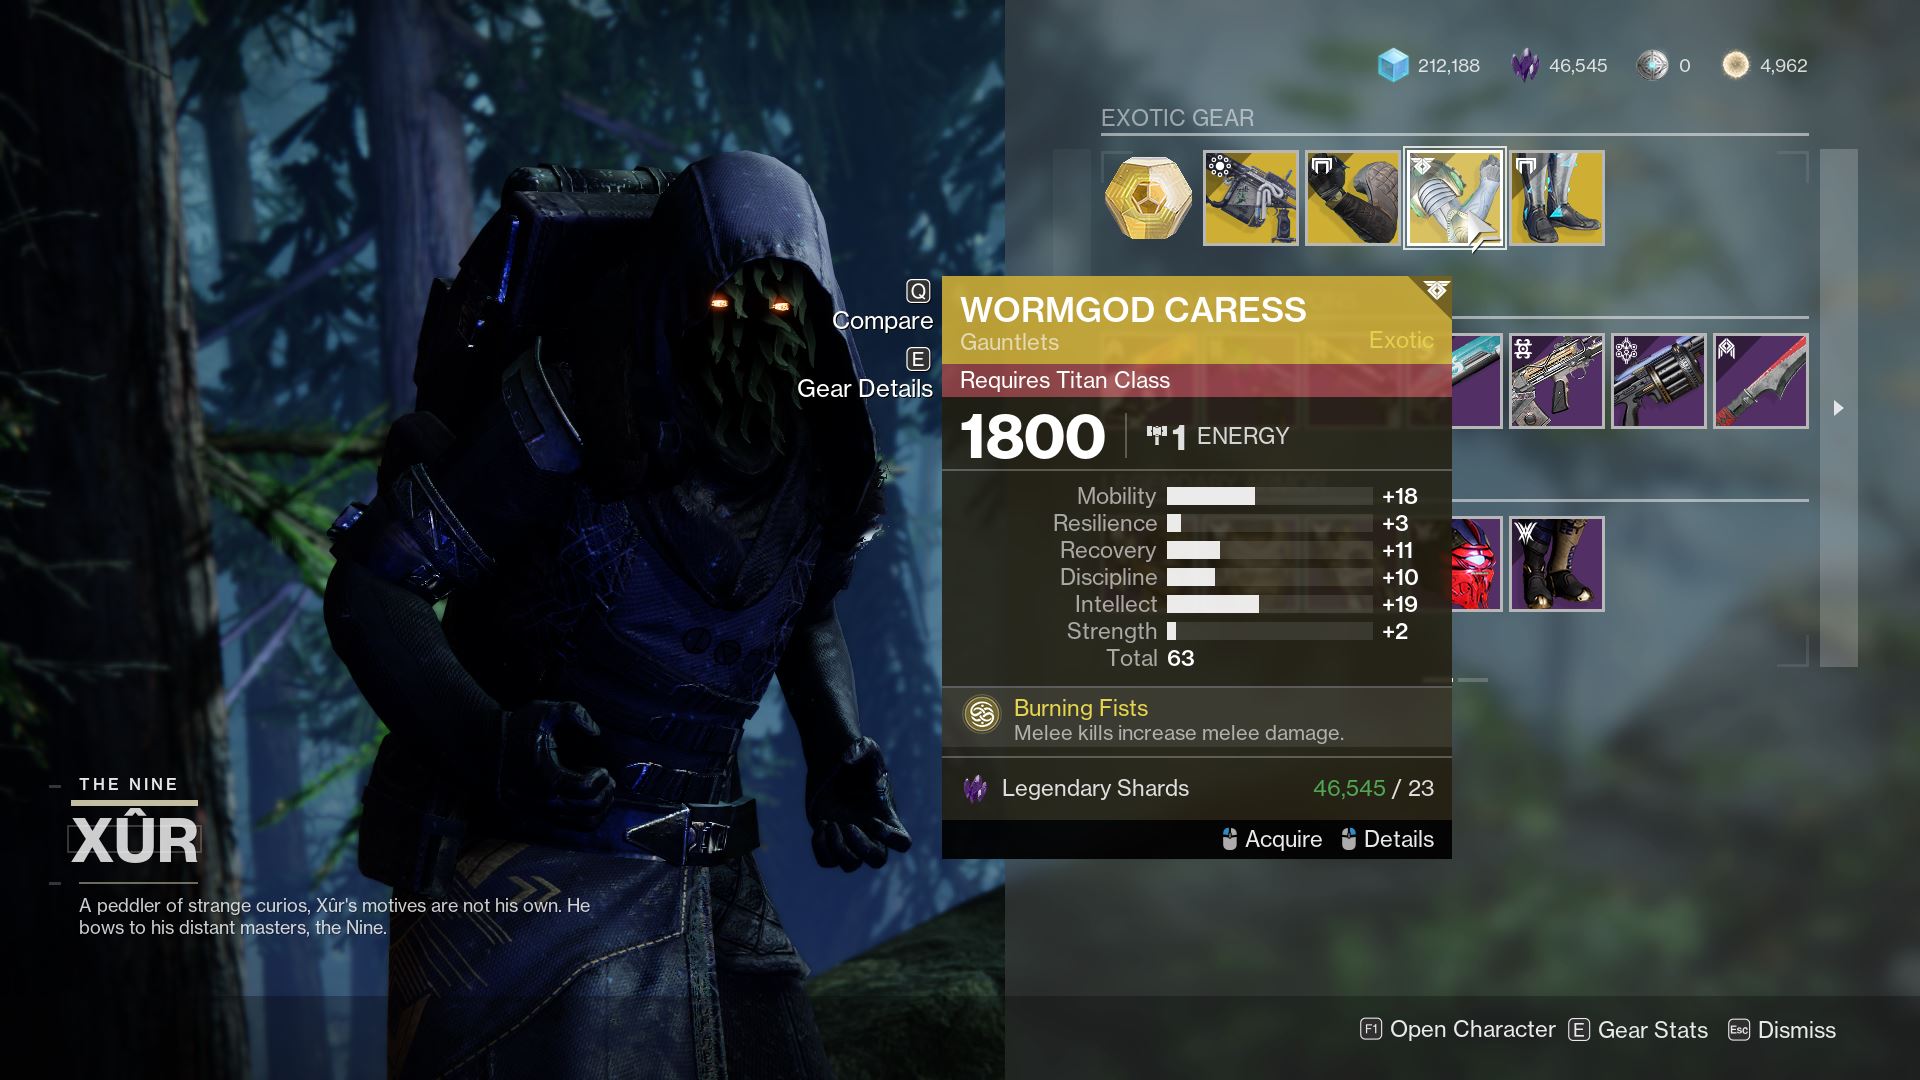 Where Is Xur Today In Destiny 2? Location And Exotic Inventory (Nov 3 - Nov 7)